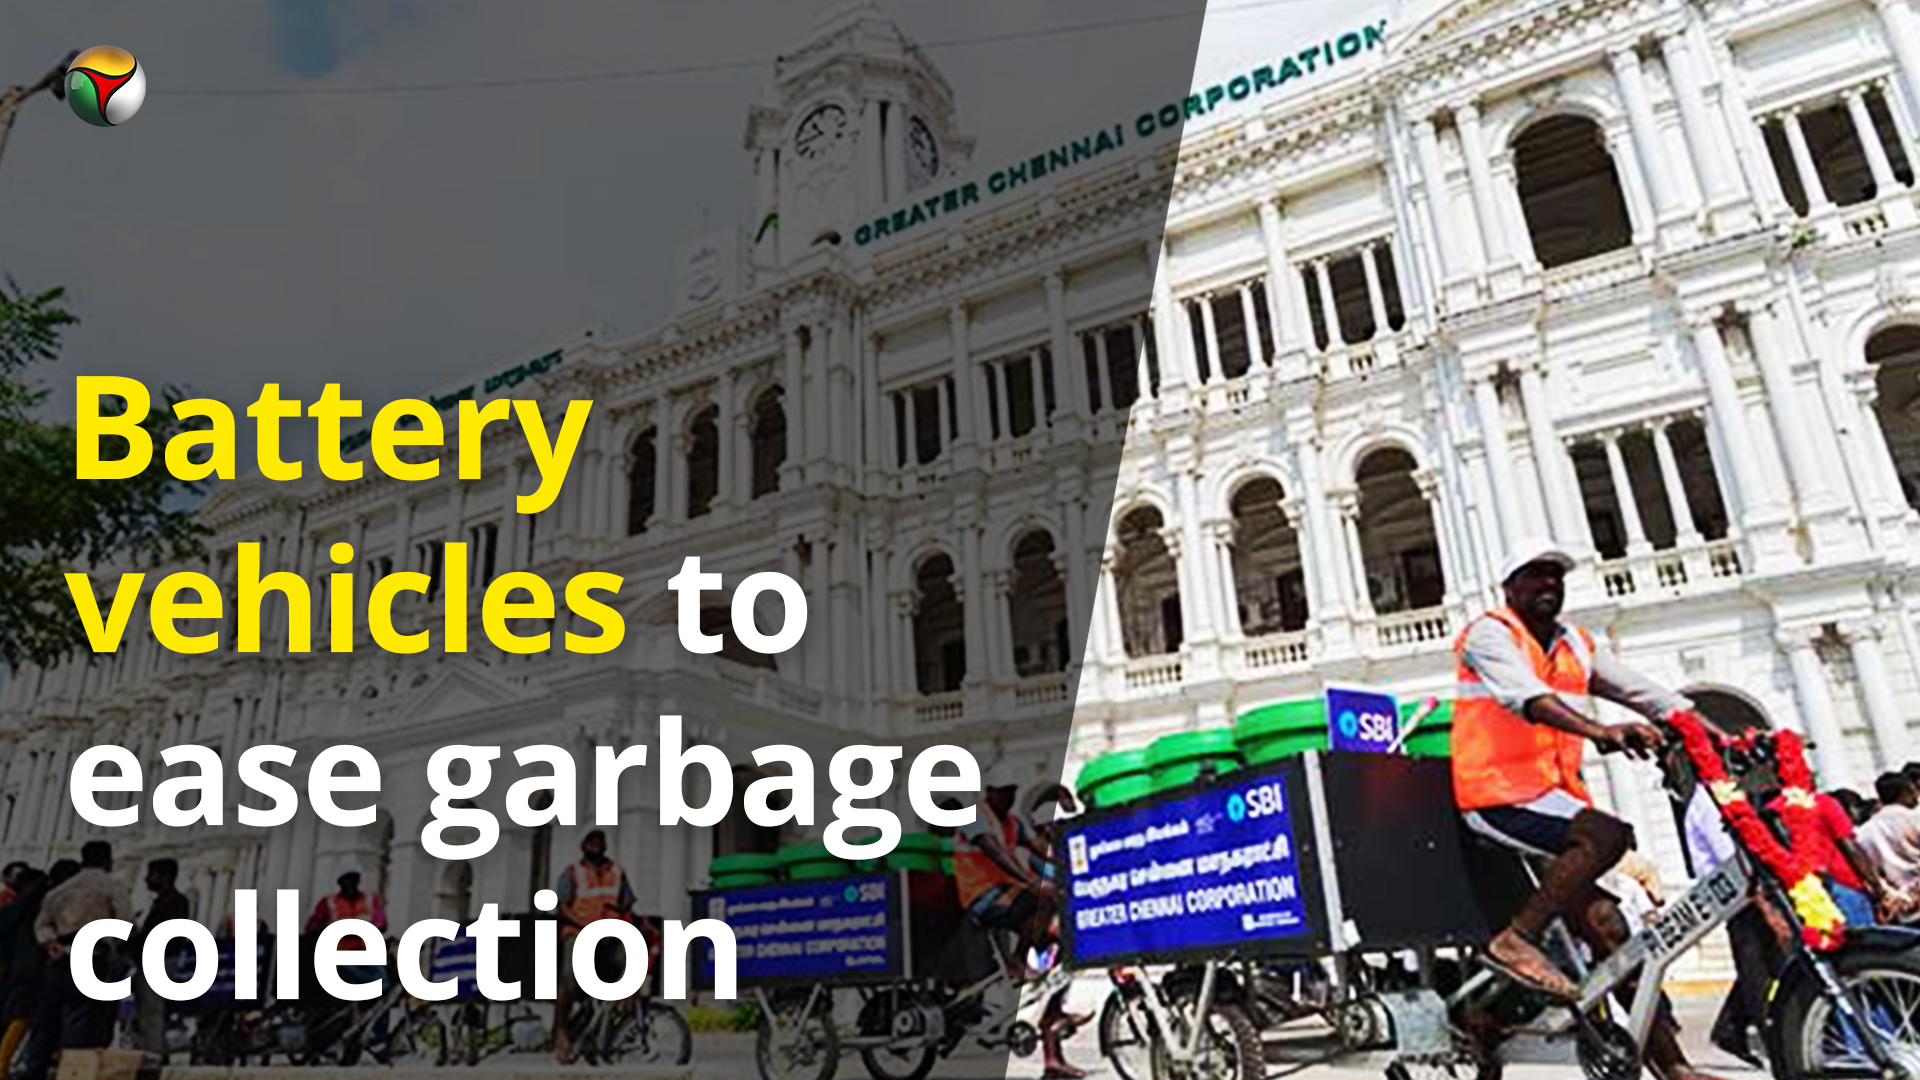 Battery vehicles to ease garbage collection, keep Chennai cleaner